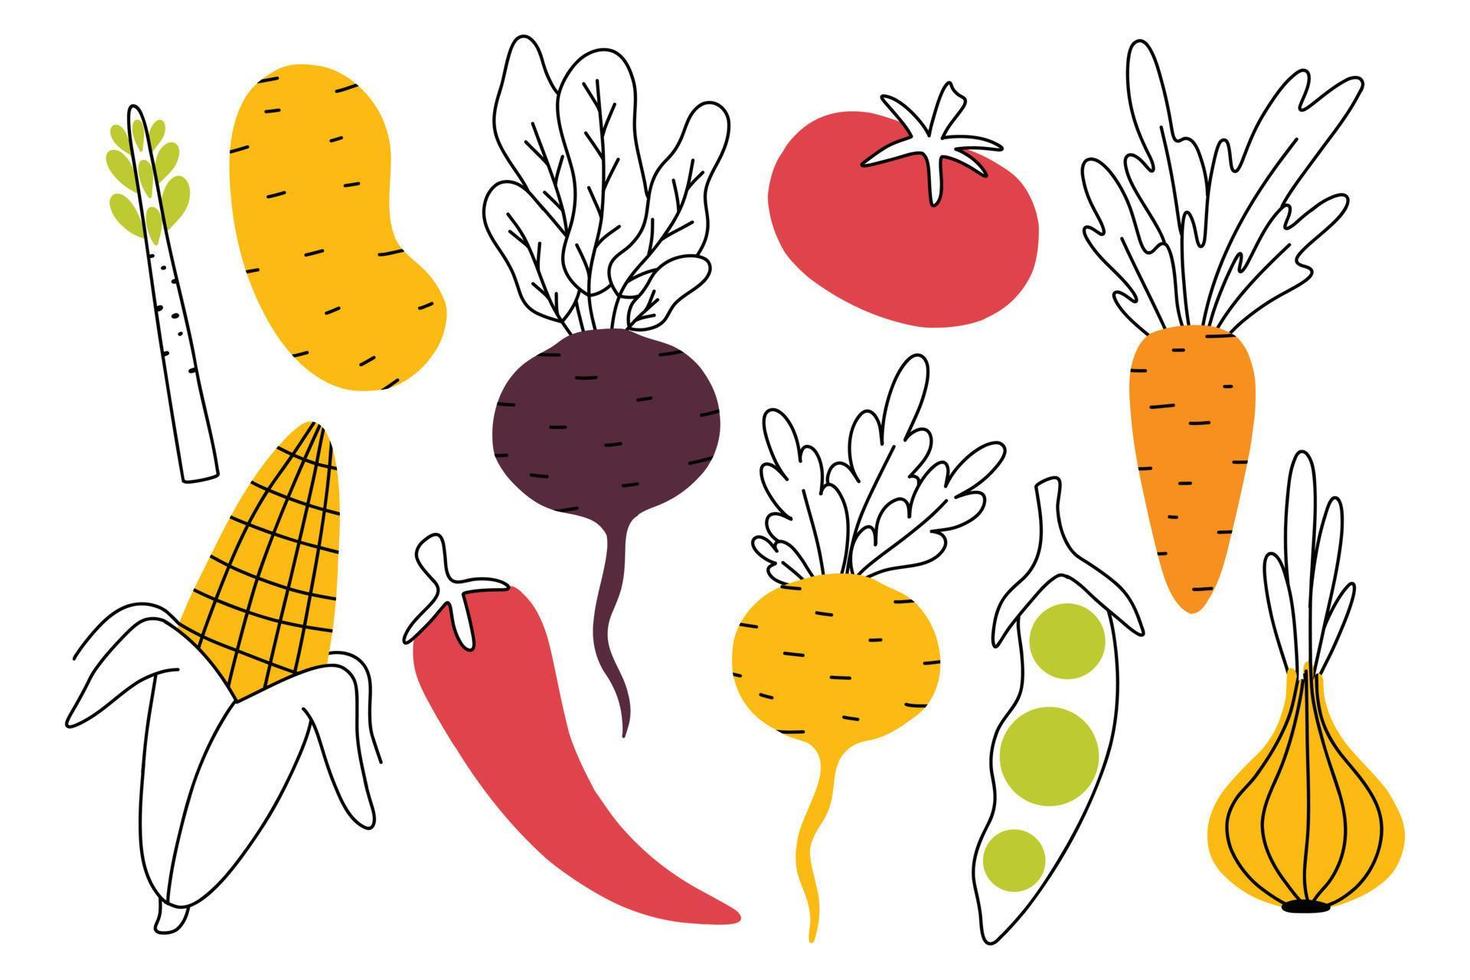 Set of root crops in doodle style. Collection of vegetables in a linear style. Vector illustration. Onions, peas, beets, turnips, tomatoes, corn. Types of root crops.